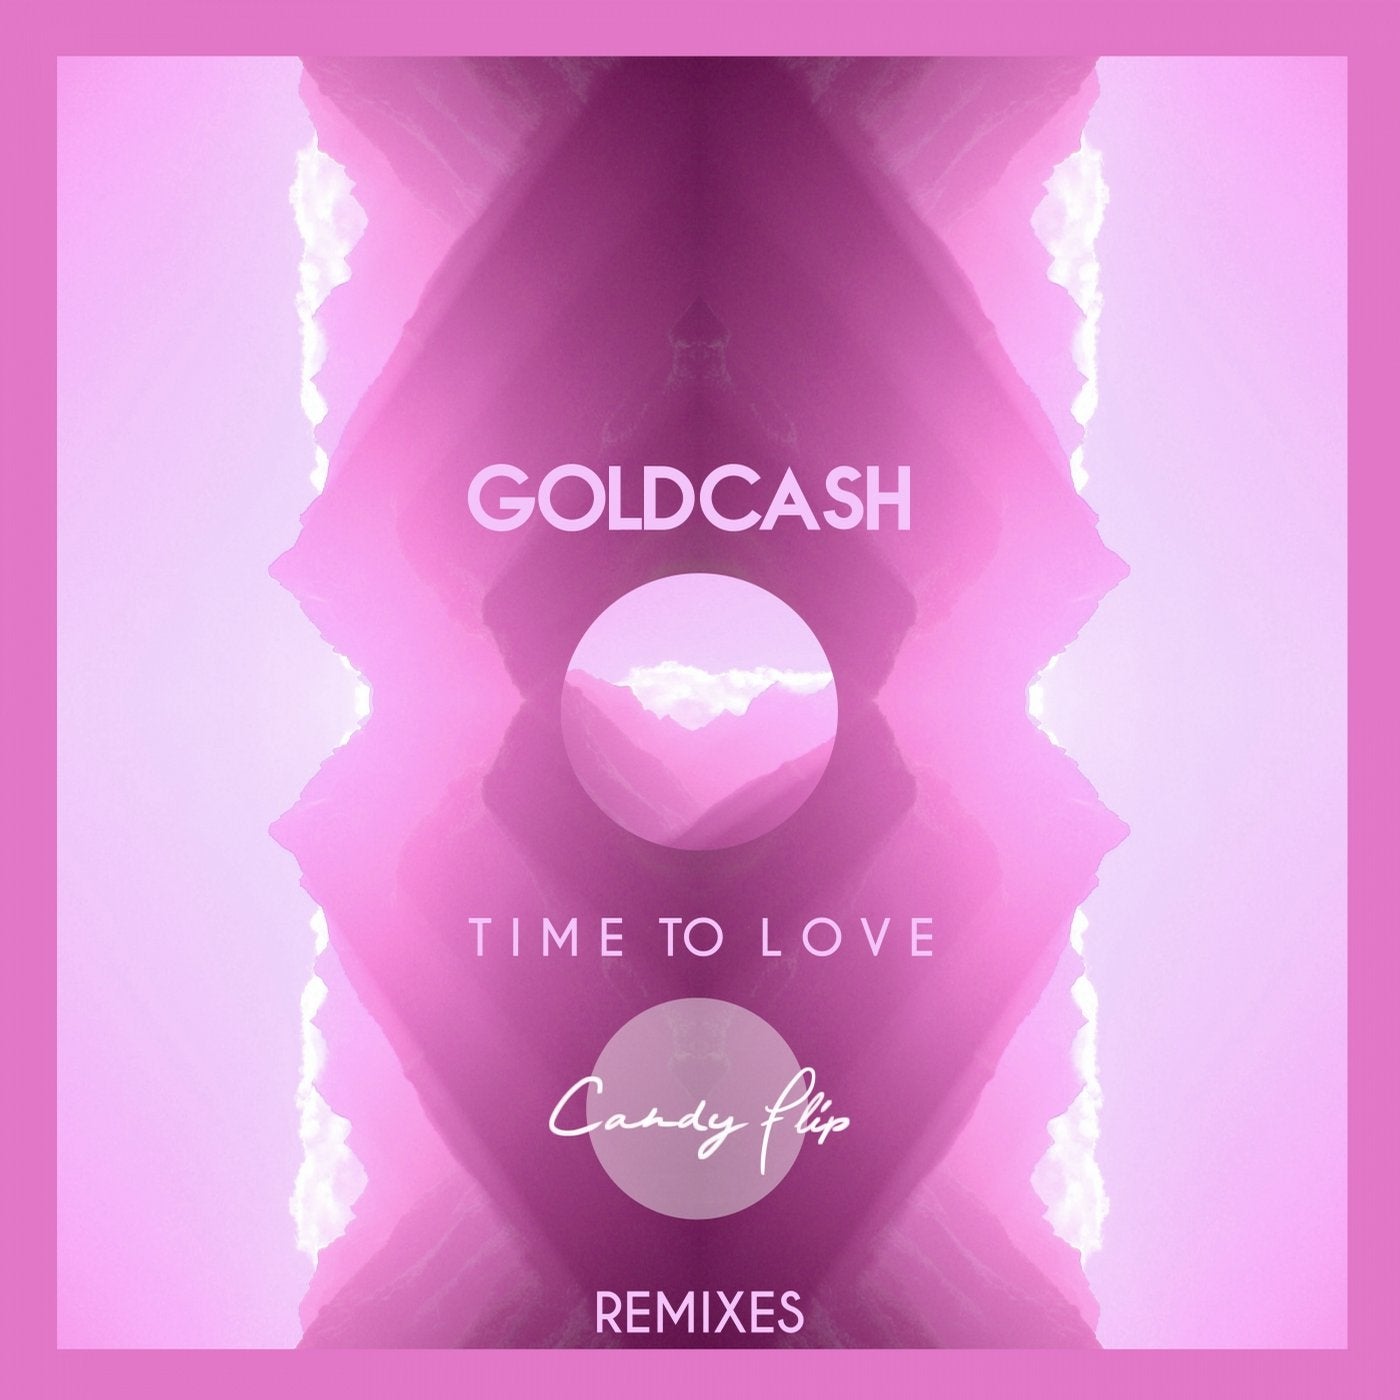 Time to Love. To Love re. Lovely песня ремикс. Candy Remix.